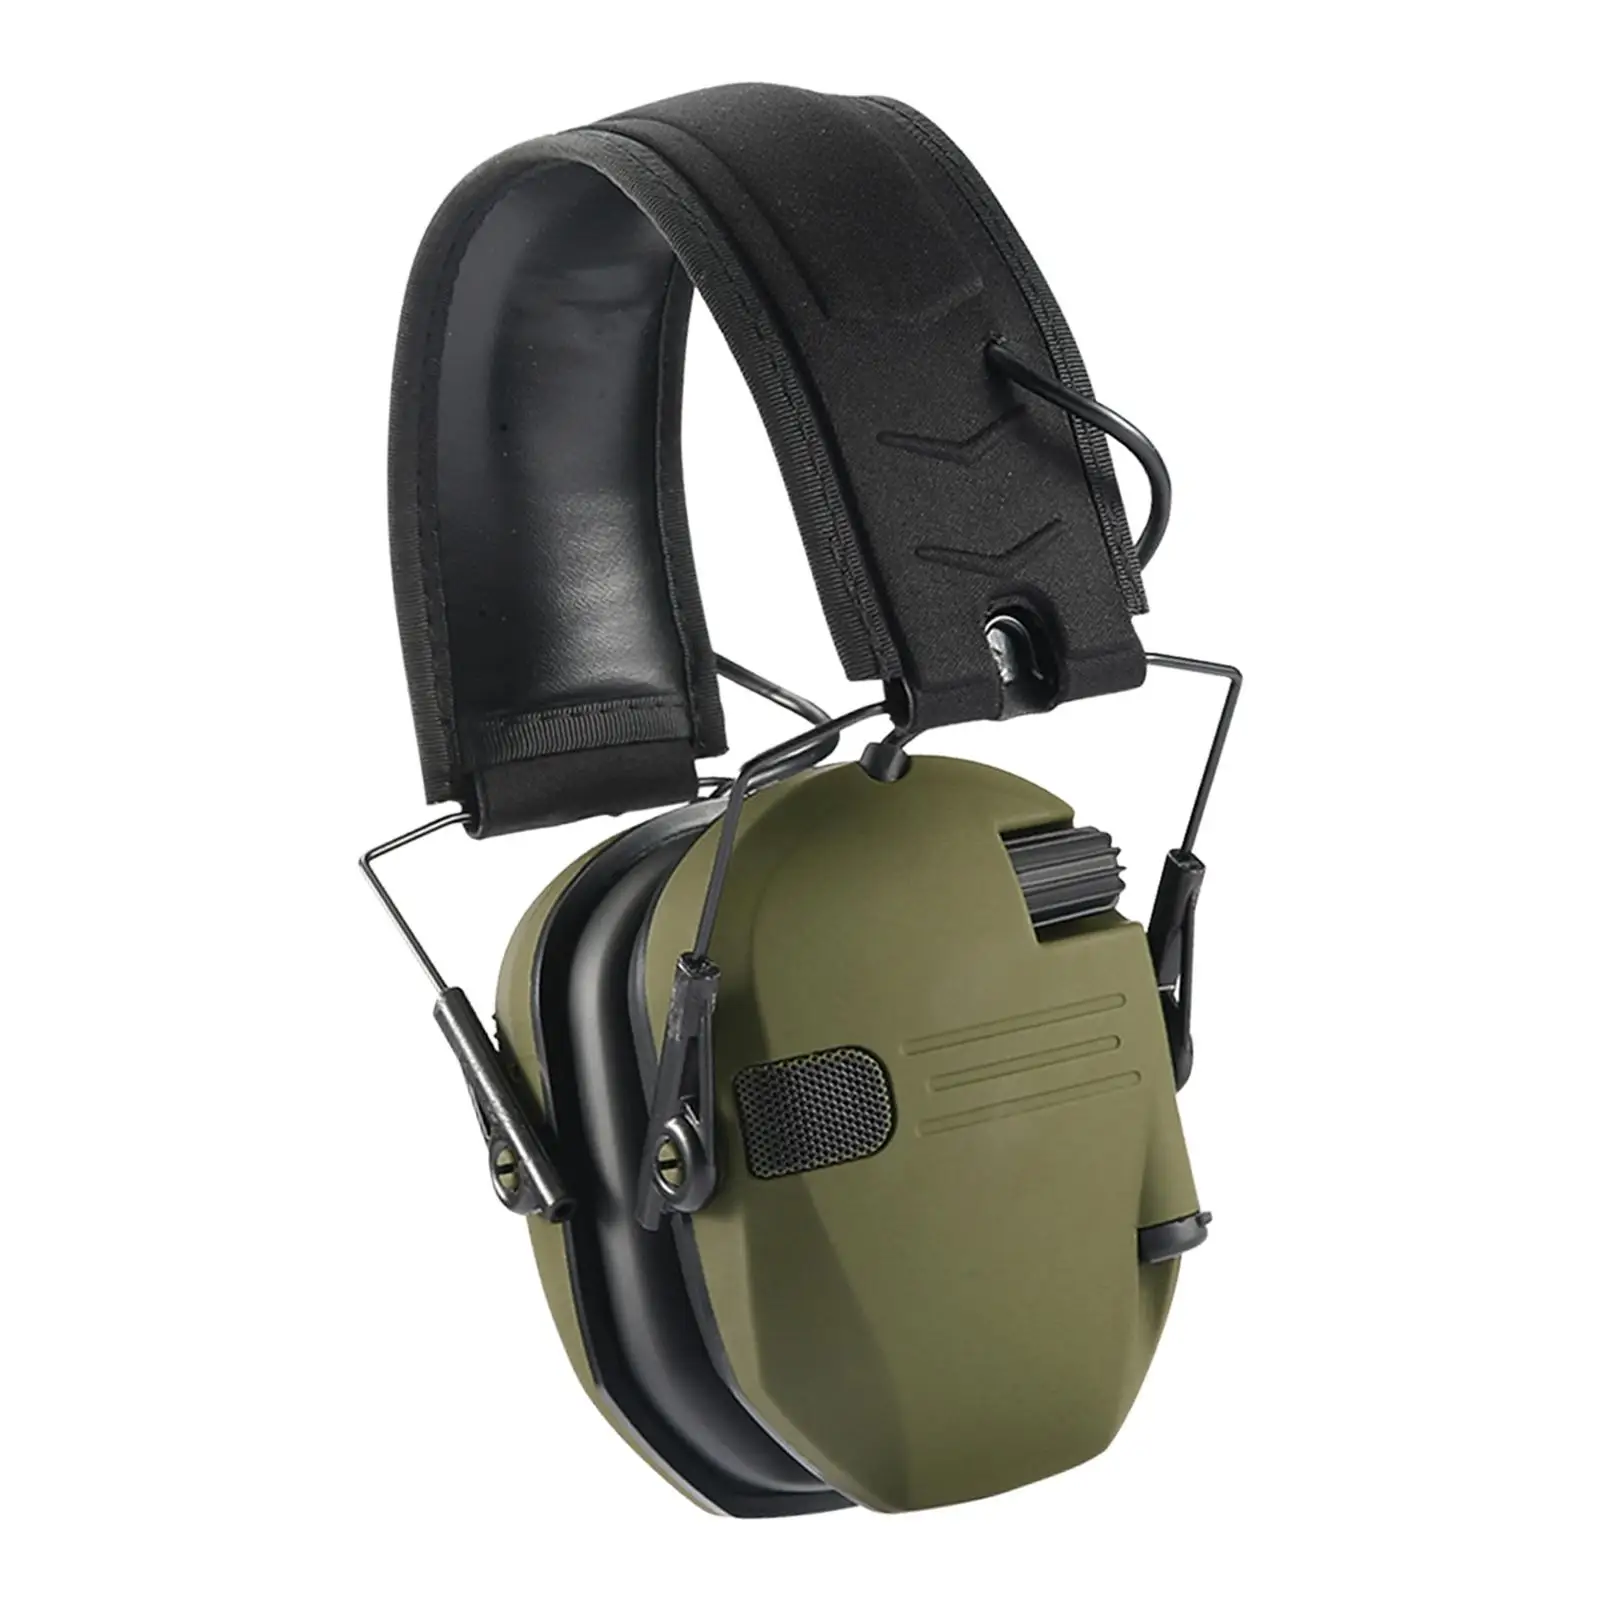 Electronic Earmuffs Soundproof Safety Ear Protection Head Mounted Noise Reduction Ear Muffs for Study Work Mowing